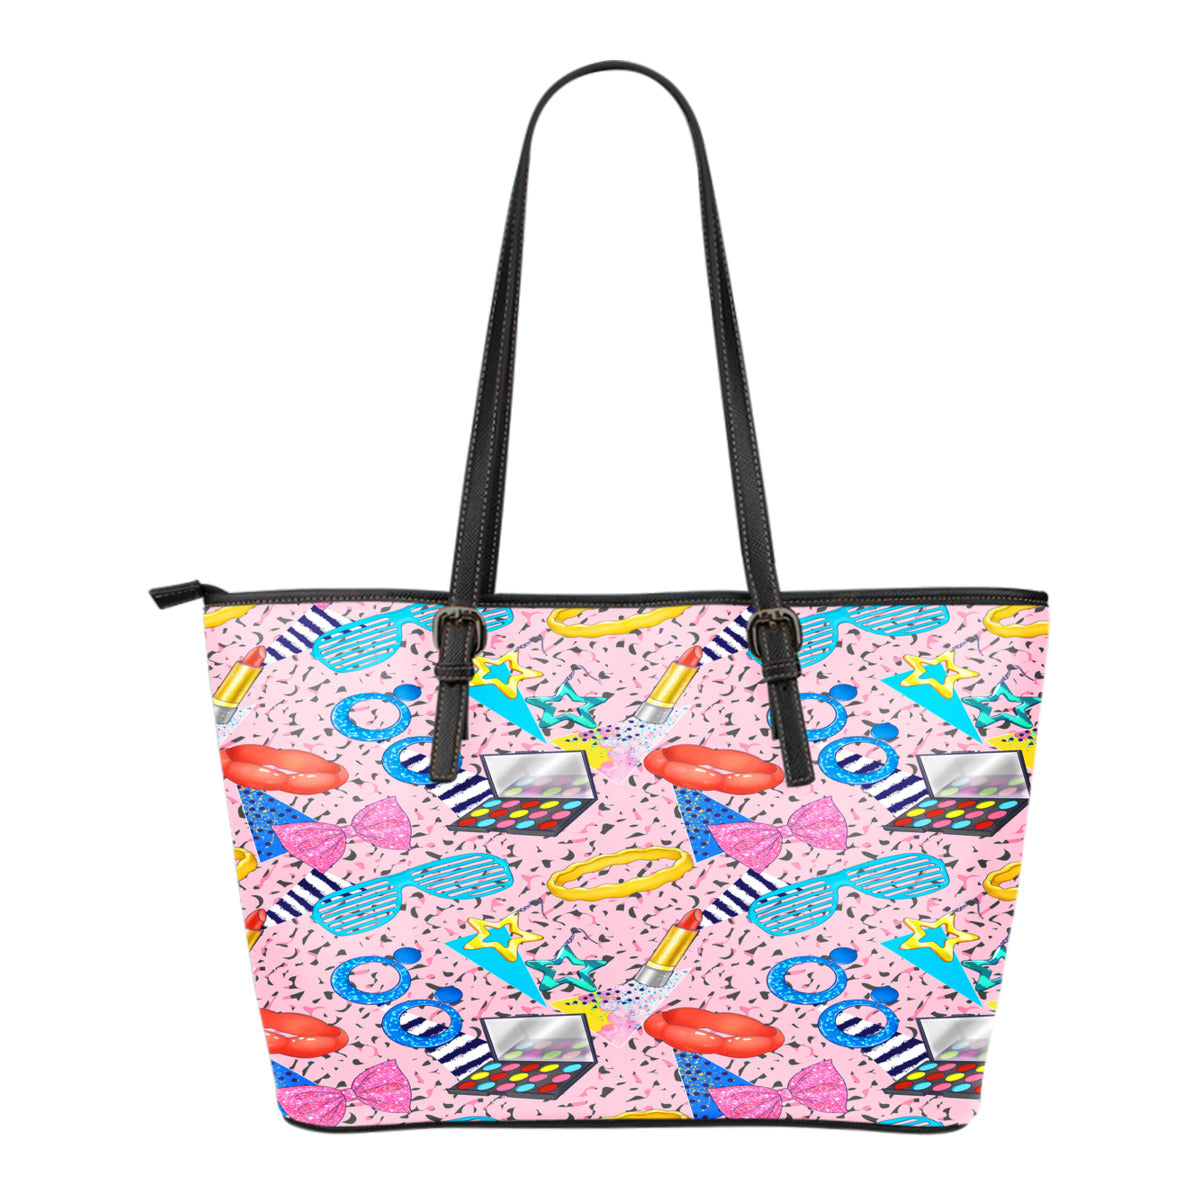 80s Fashion Themed Design C7 Women Small Leather Tote Bag